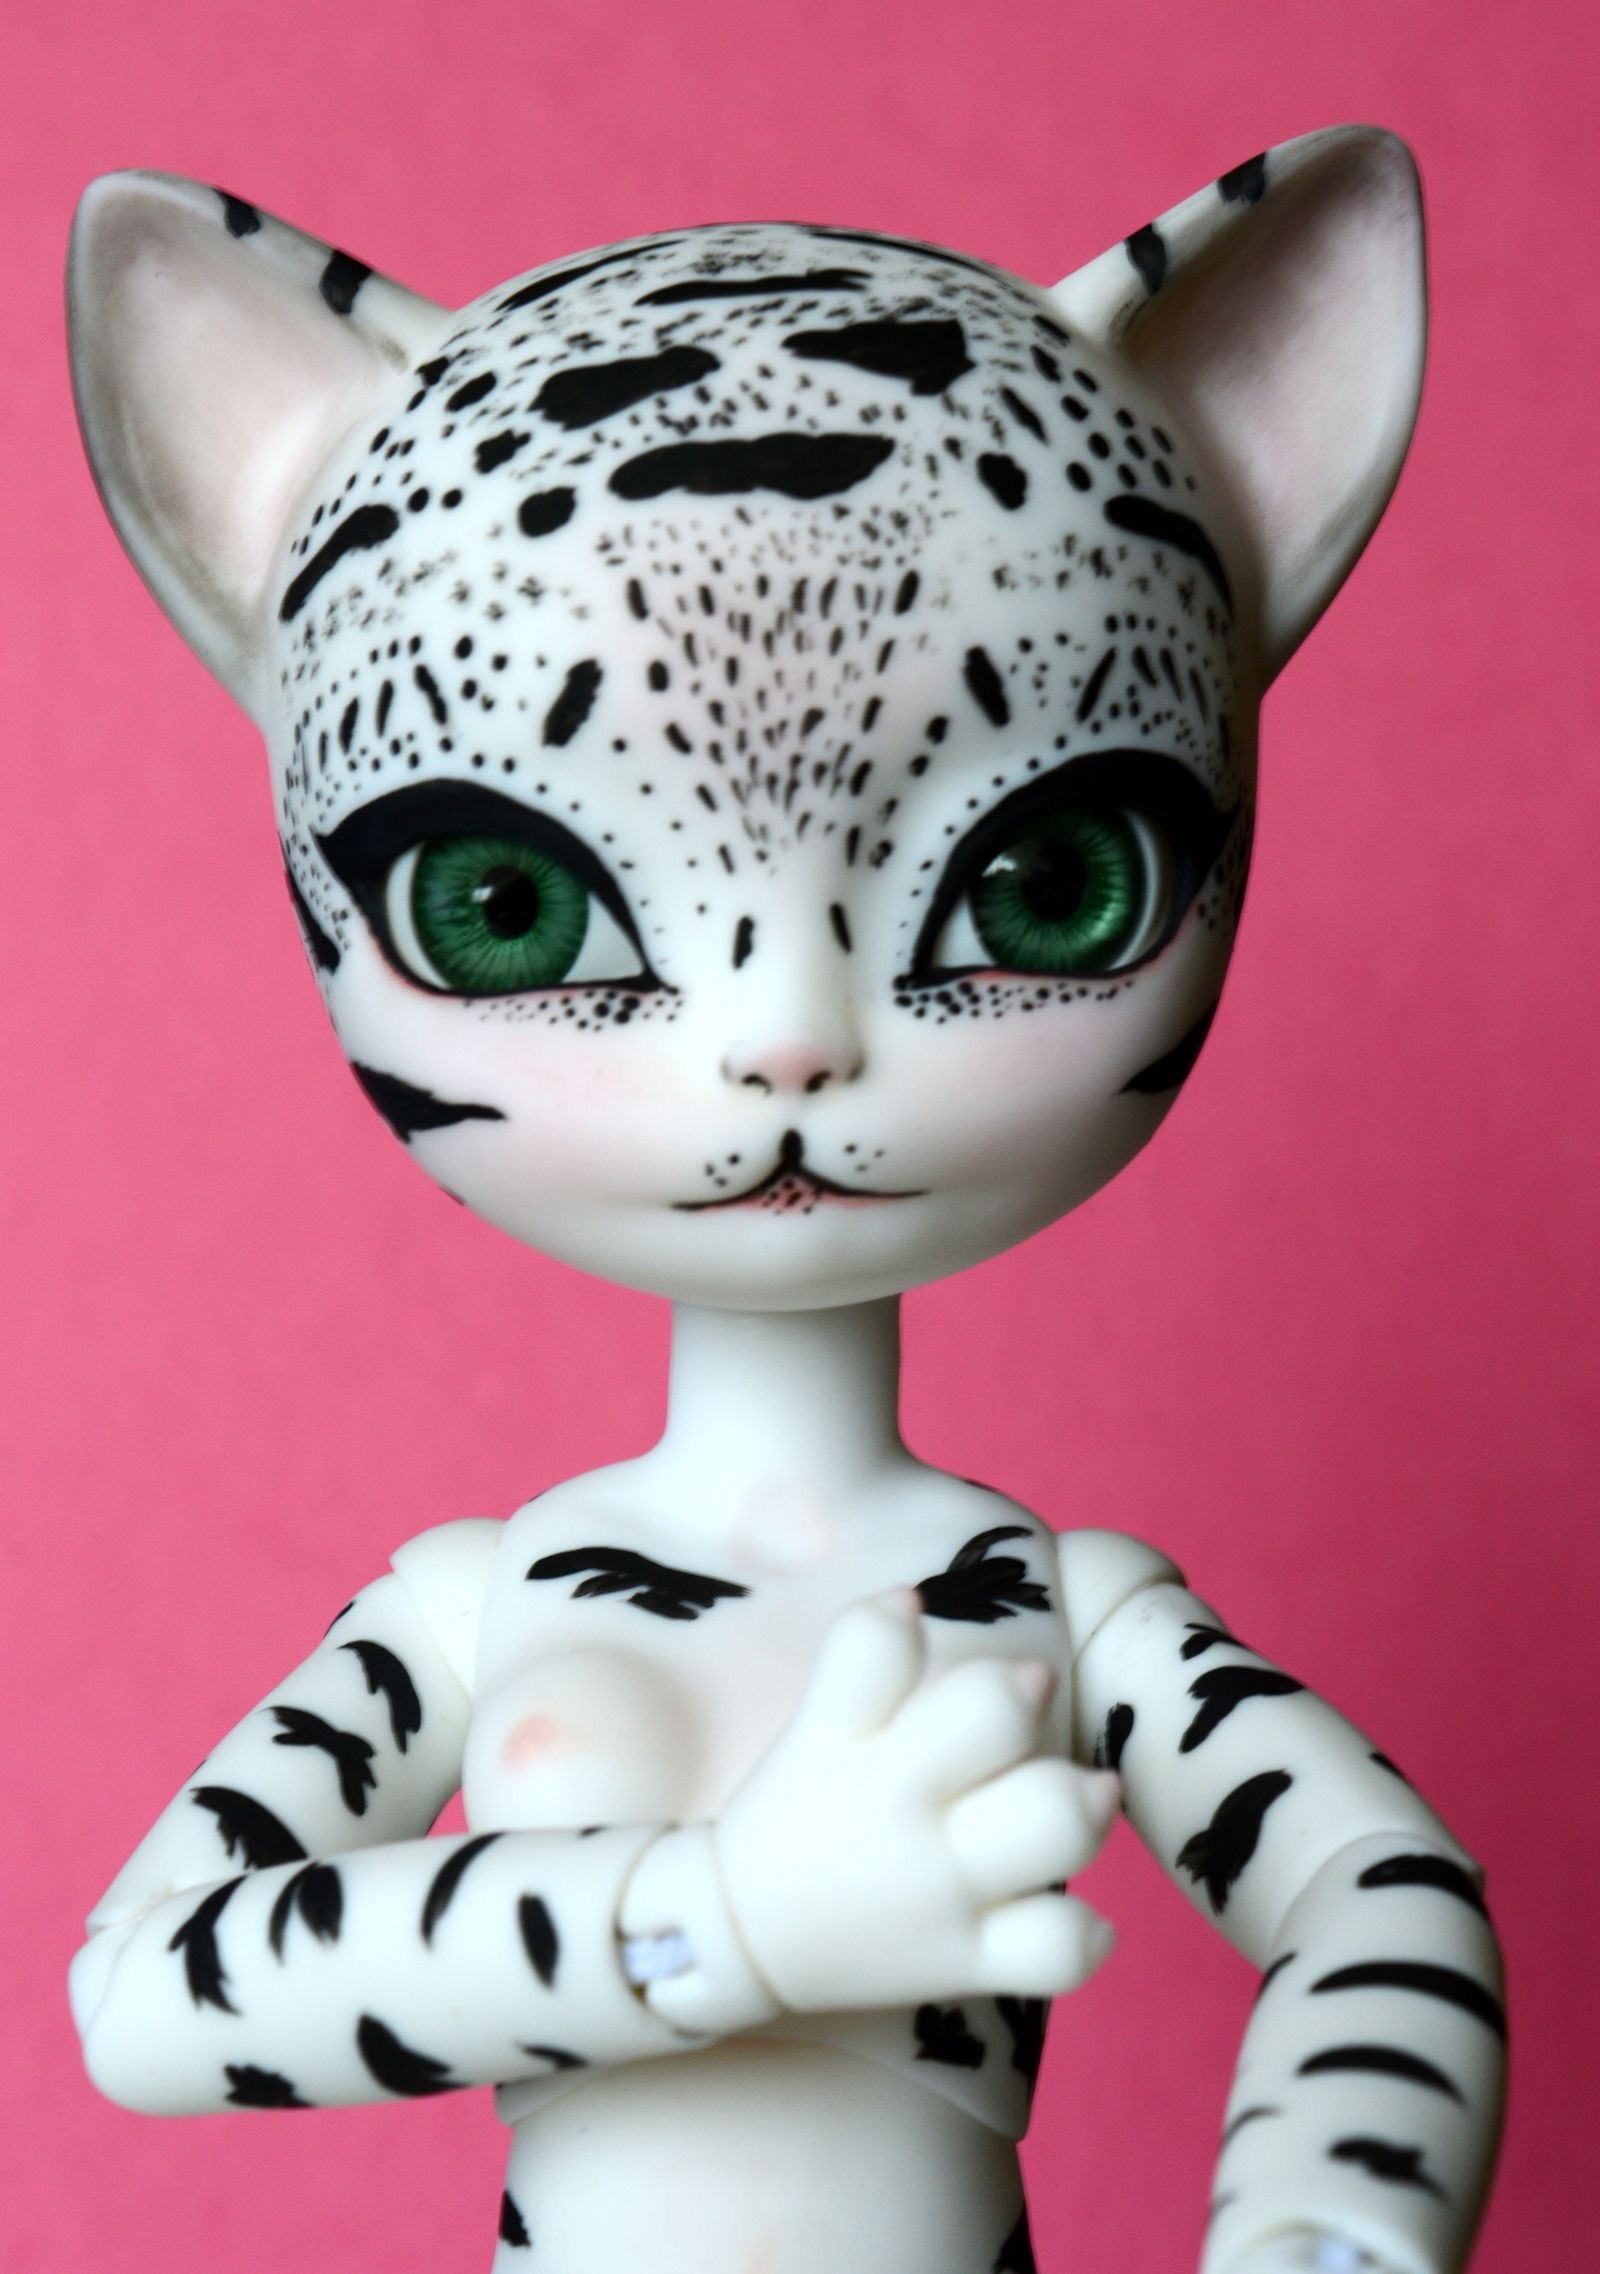 Anthro ball jointed cat doll (BJD) Freya face up and body painting